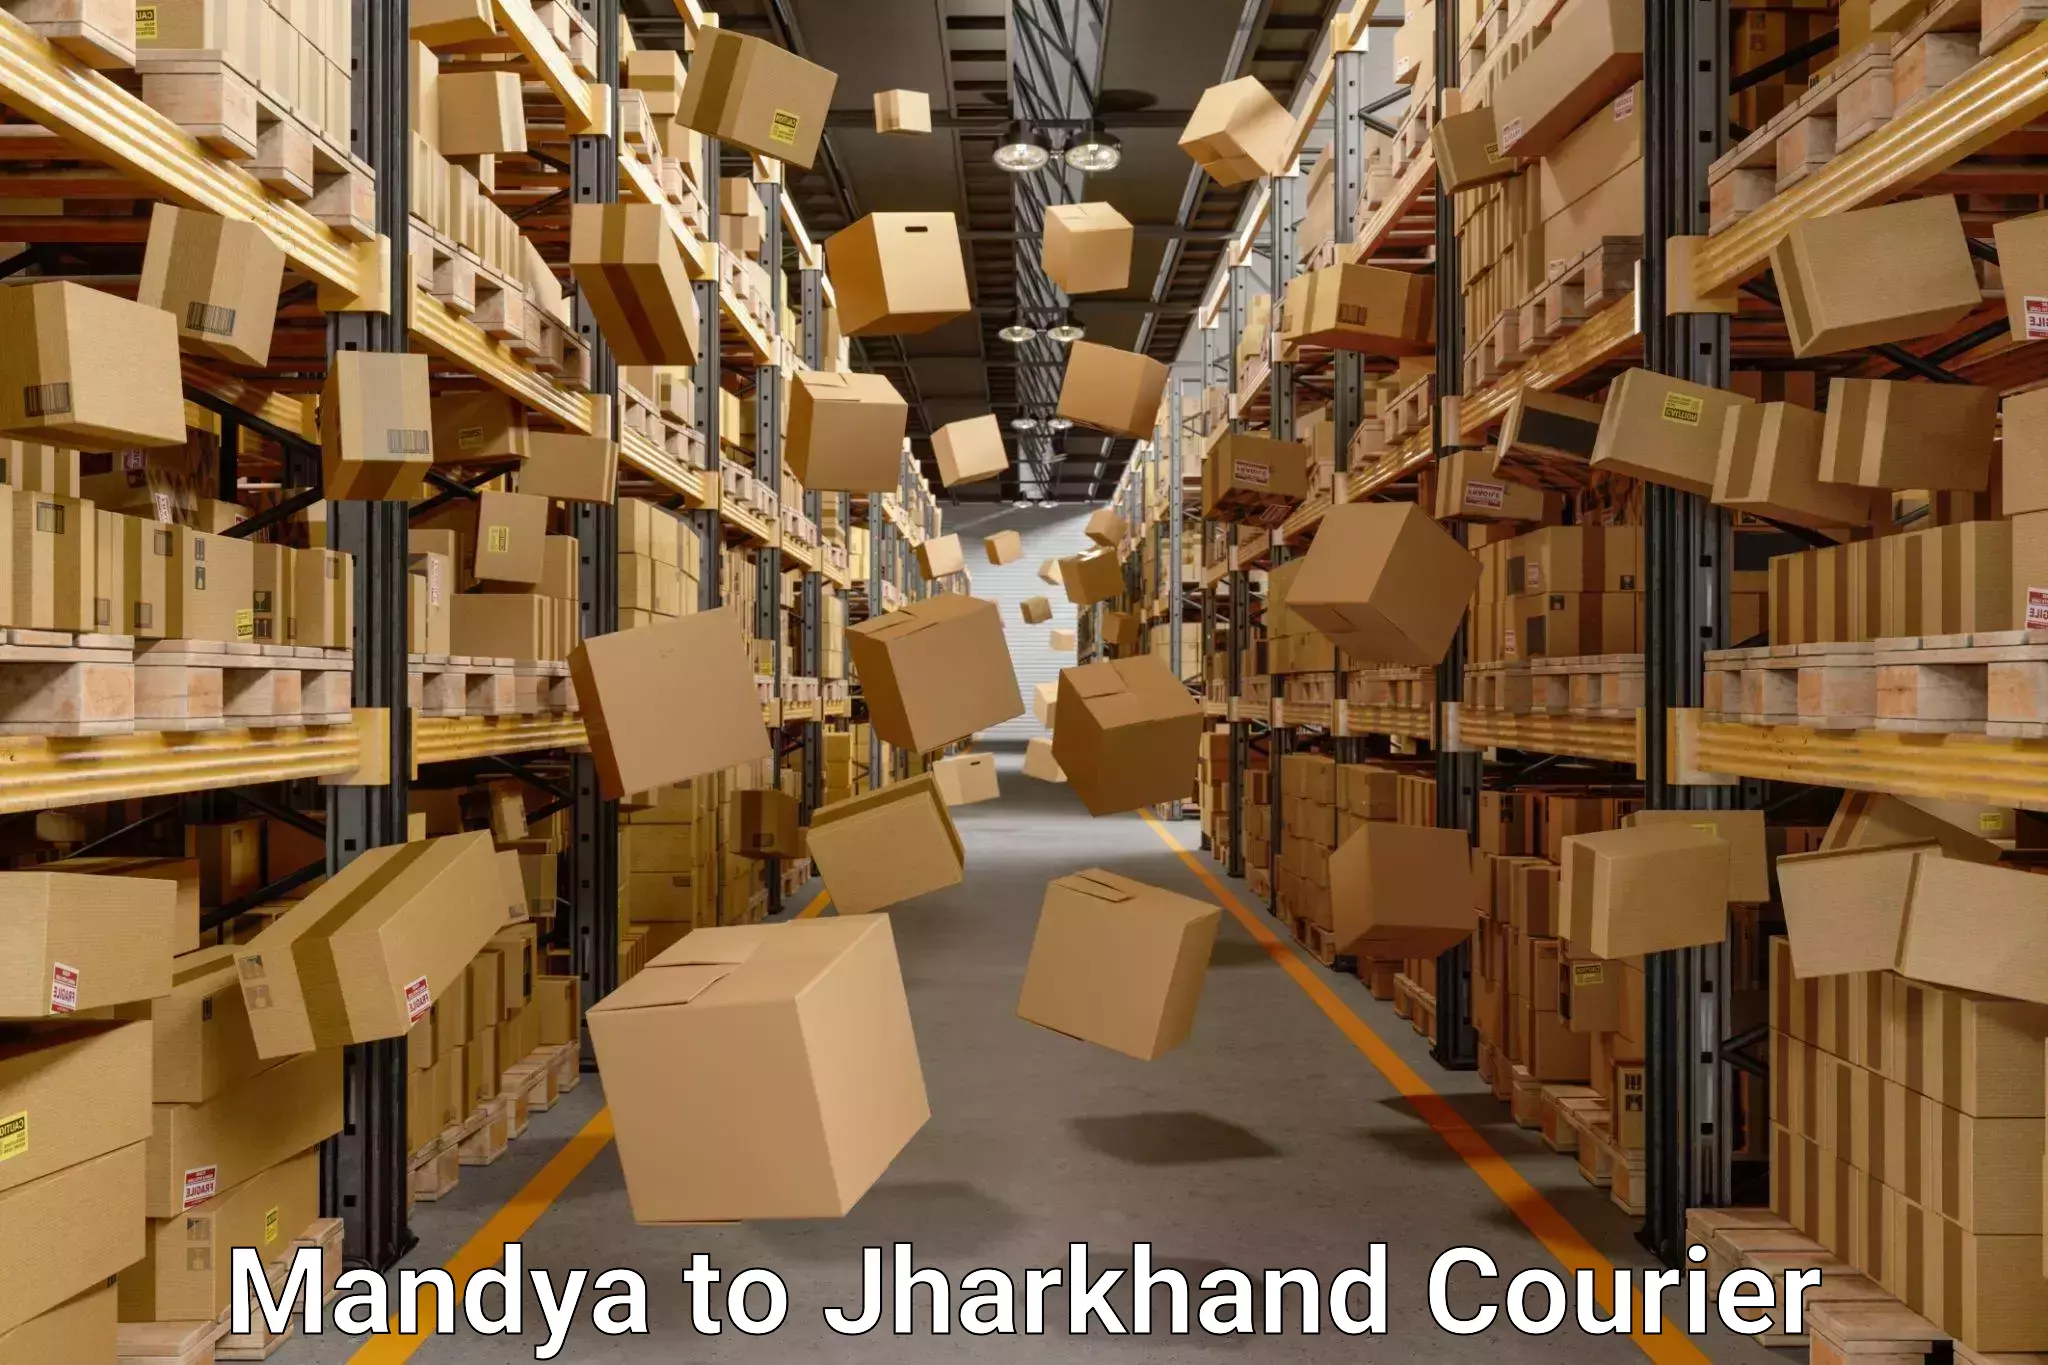 Home relocation experts Mandya to Jamshedpur